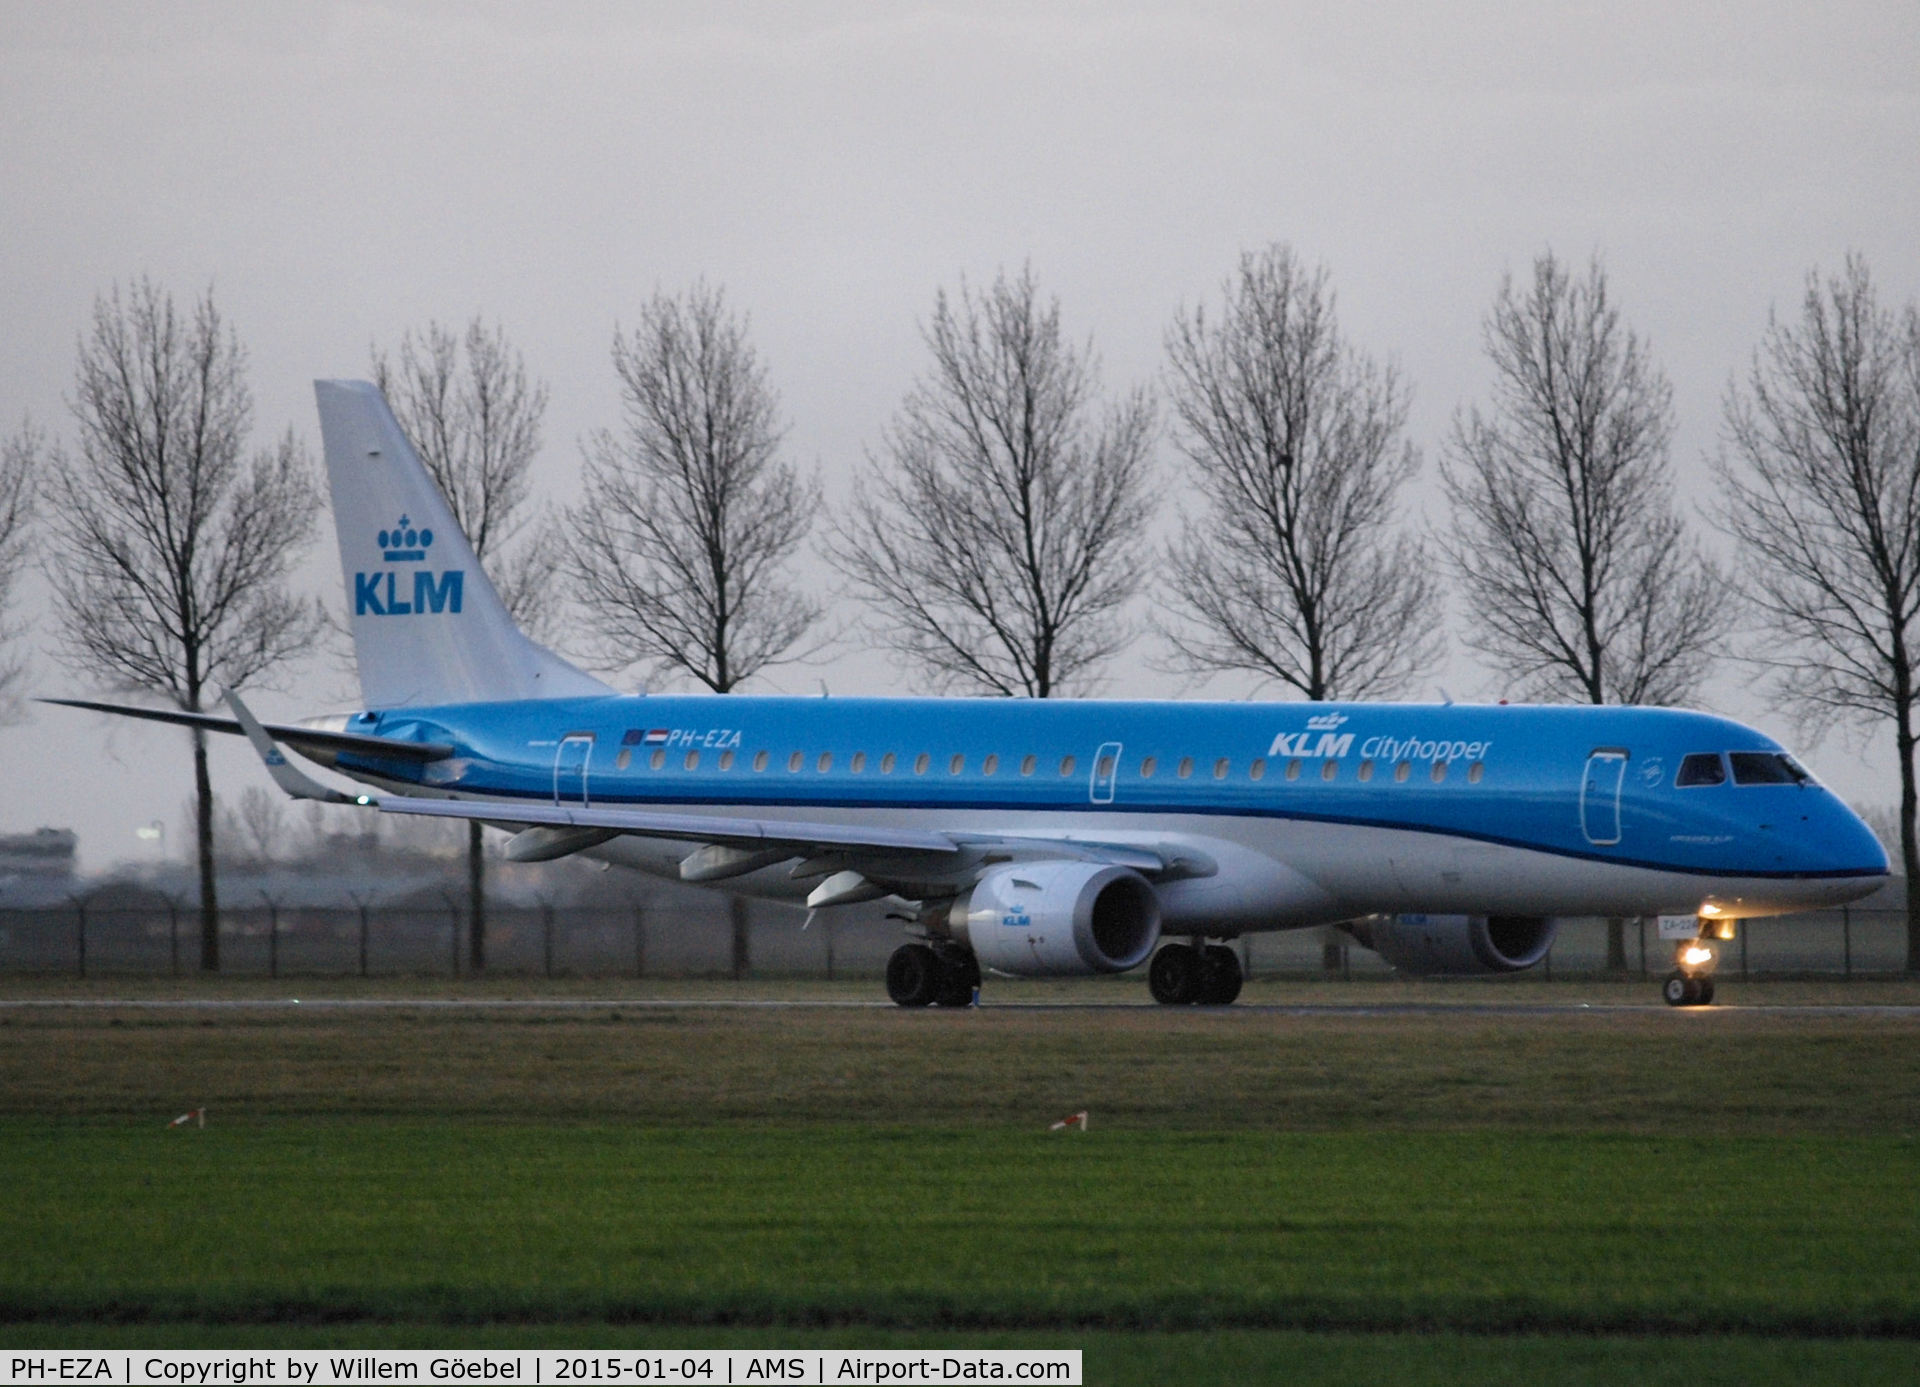 PH-EZA, 2008 Embraer 190LR (ERJ-190-100LR) C/N 19000224, Taxi to runway 36L of Schiphol Airport in new colours